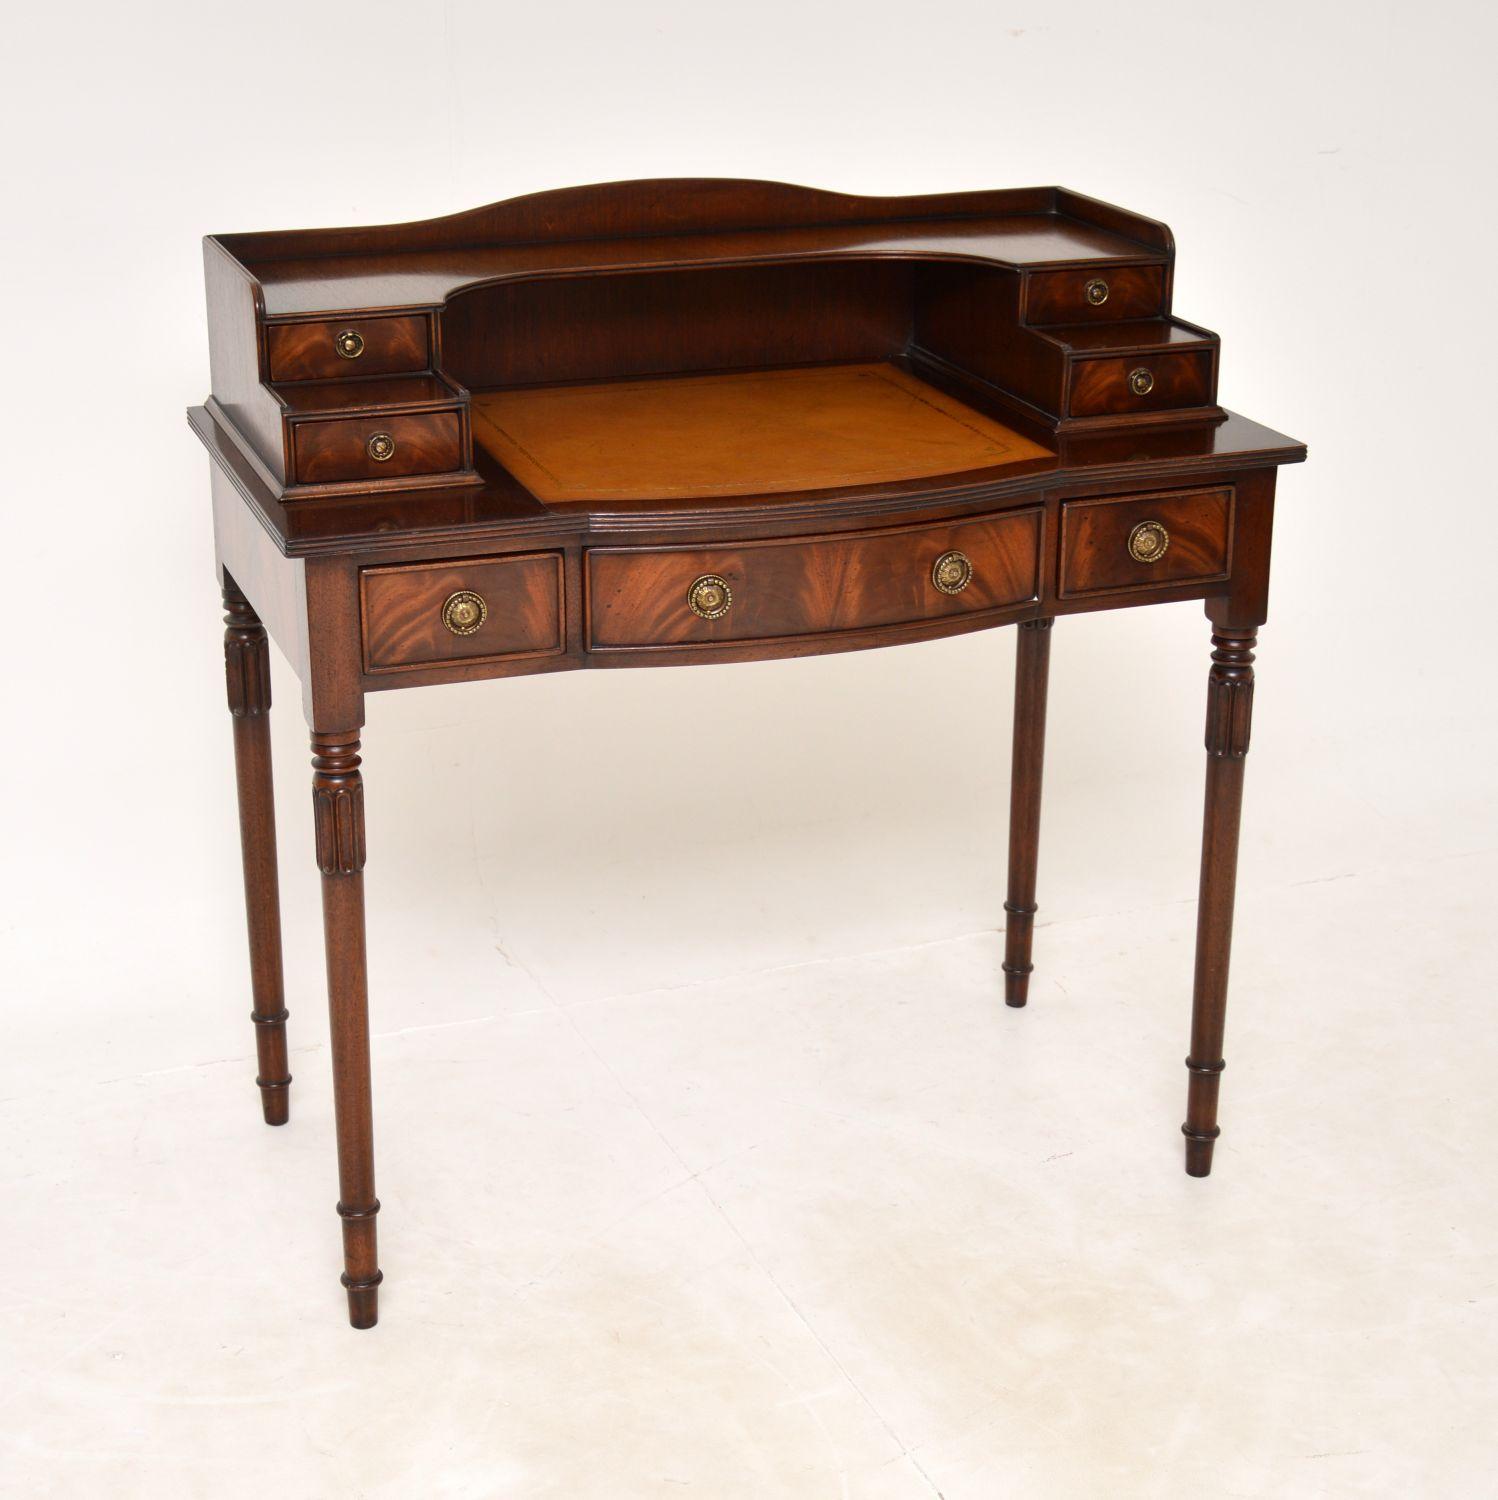 An excellent antique writing table / desk, also known as a bonheur du jour. This was made in England, it dates from around the 1930’s.
It is of superb quality, and is beautifully designed. It sits on beautifully turned legs with lovely carving. the